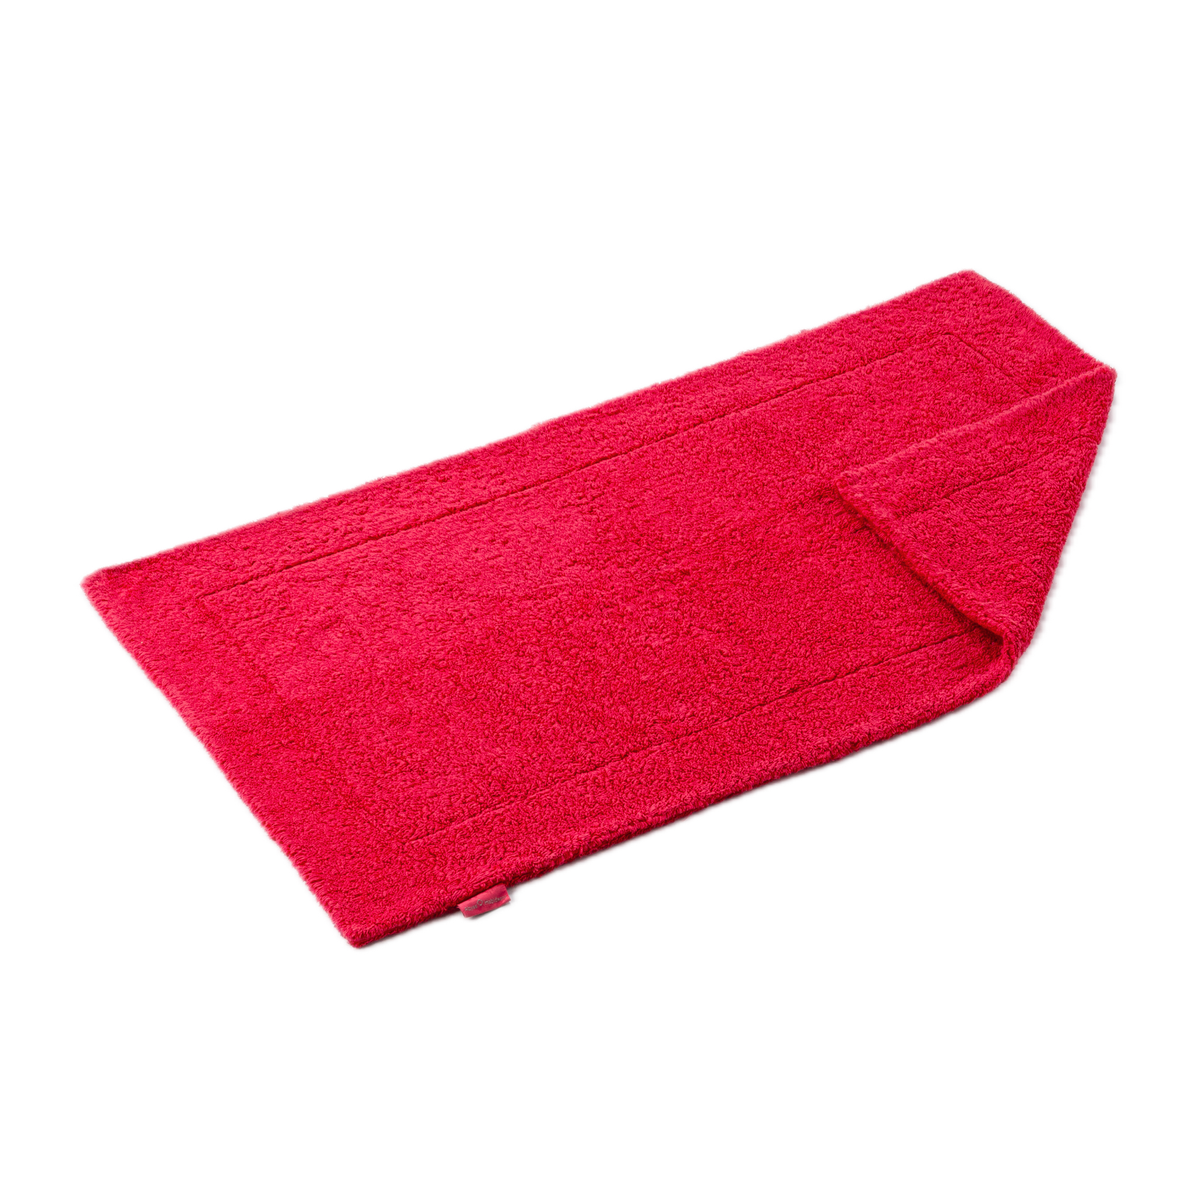 Slanted Image of Abyss Double Bath Tub Mat in Viva Magenta (579) Color with Fold